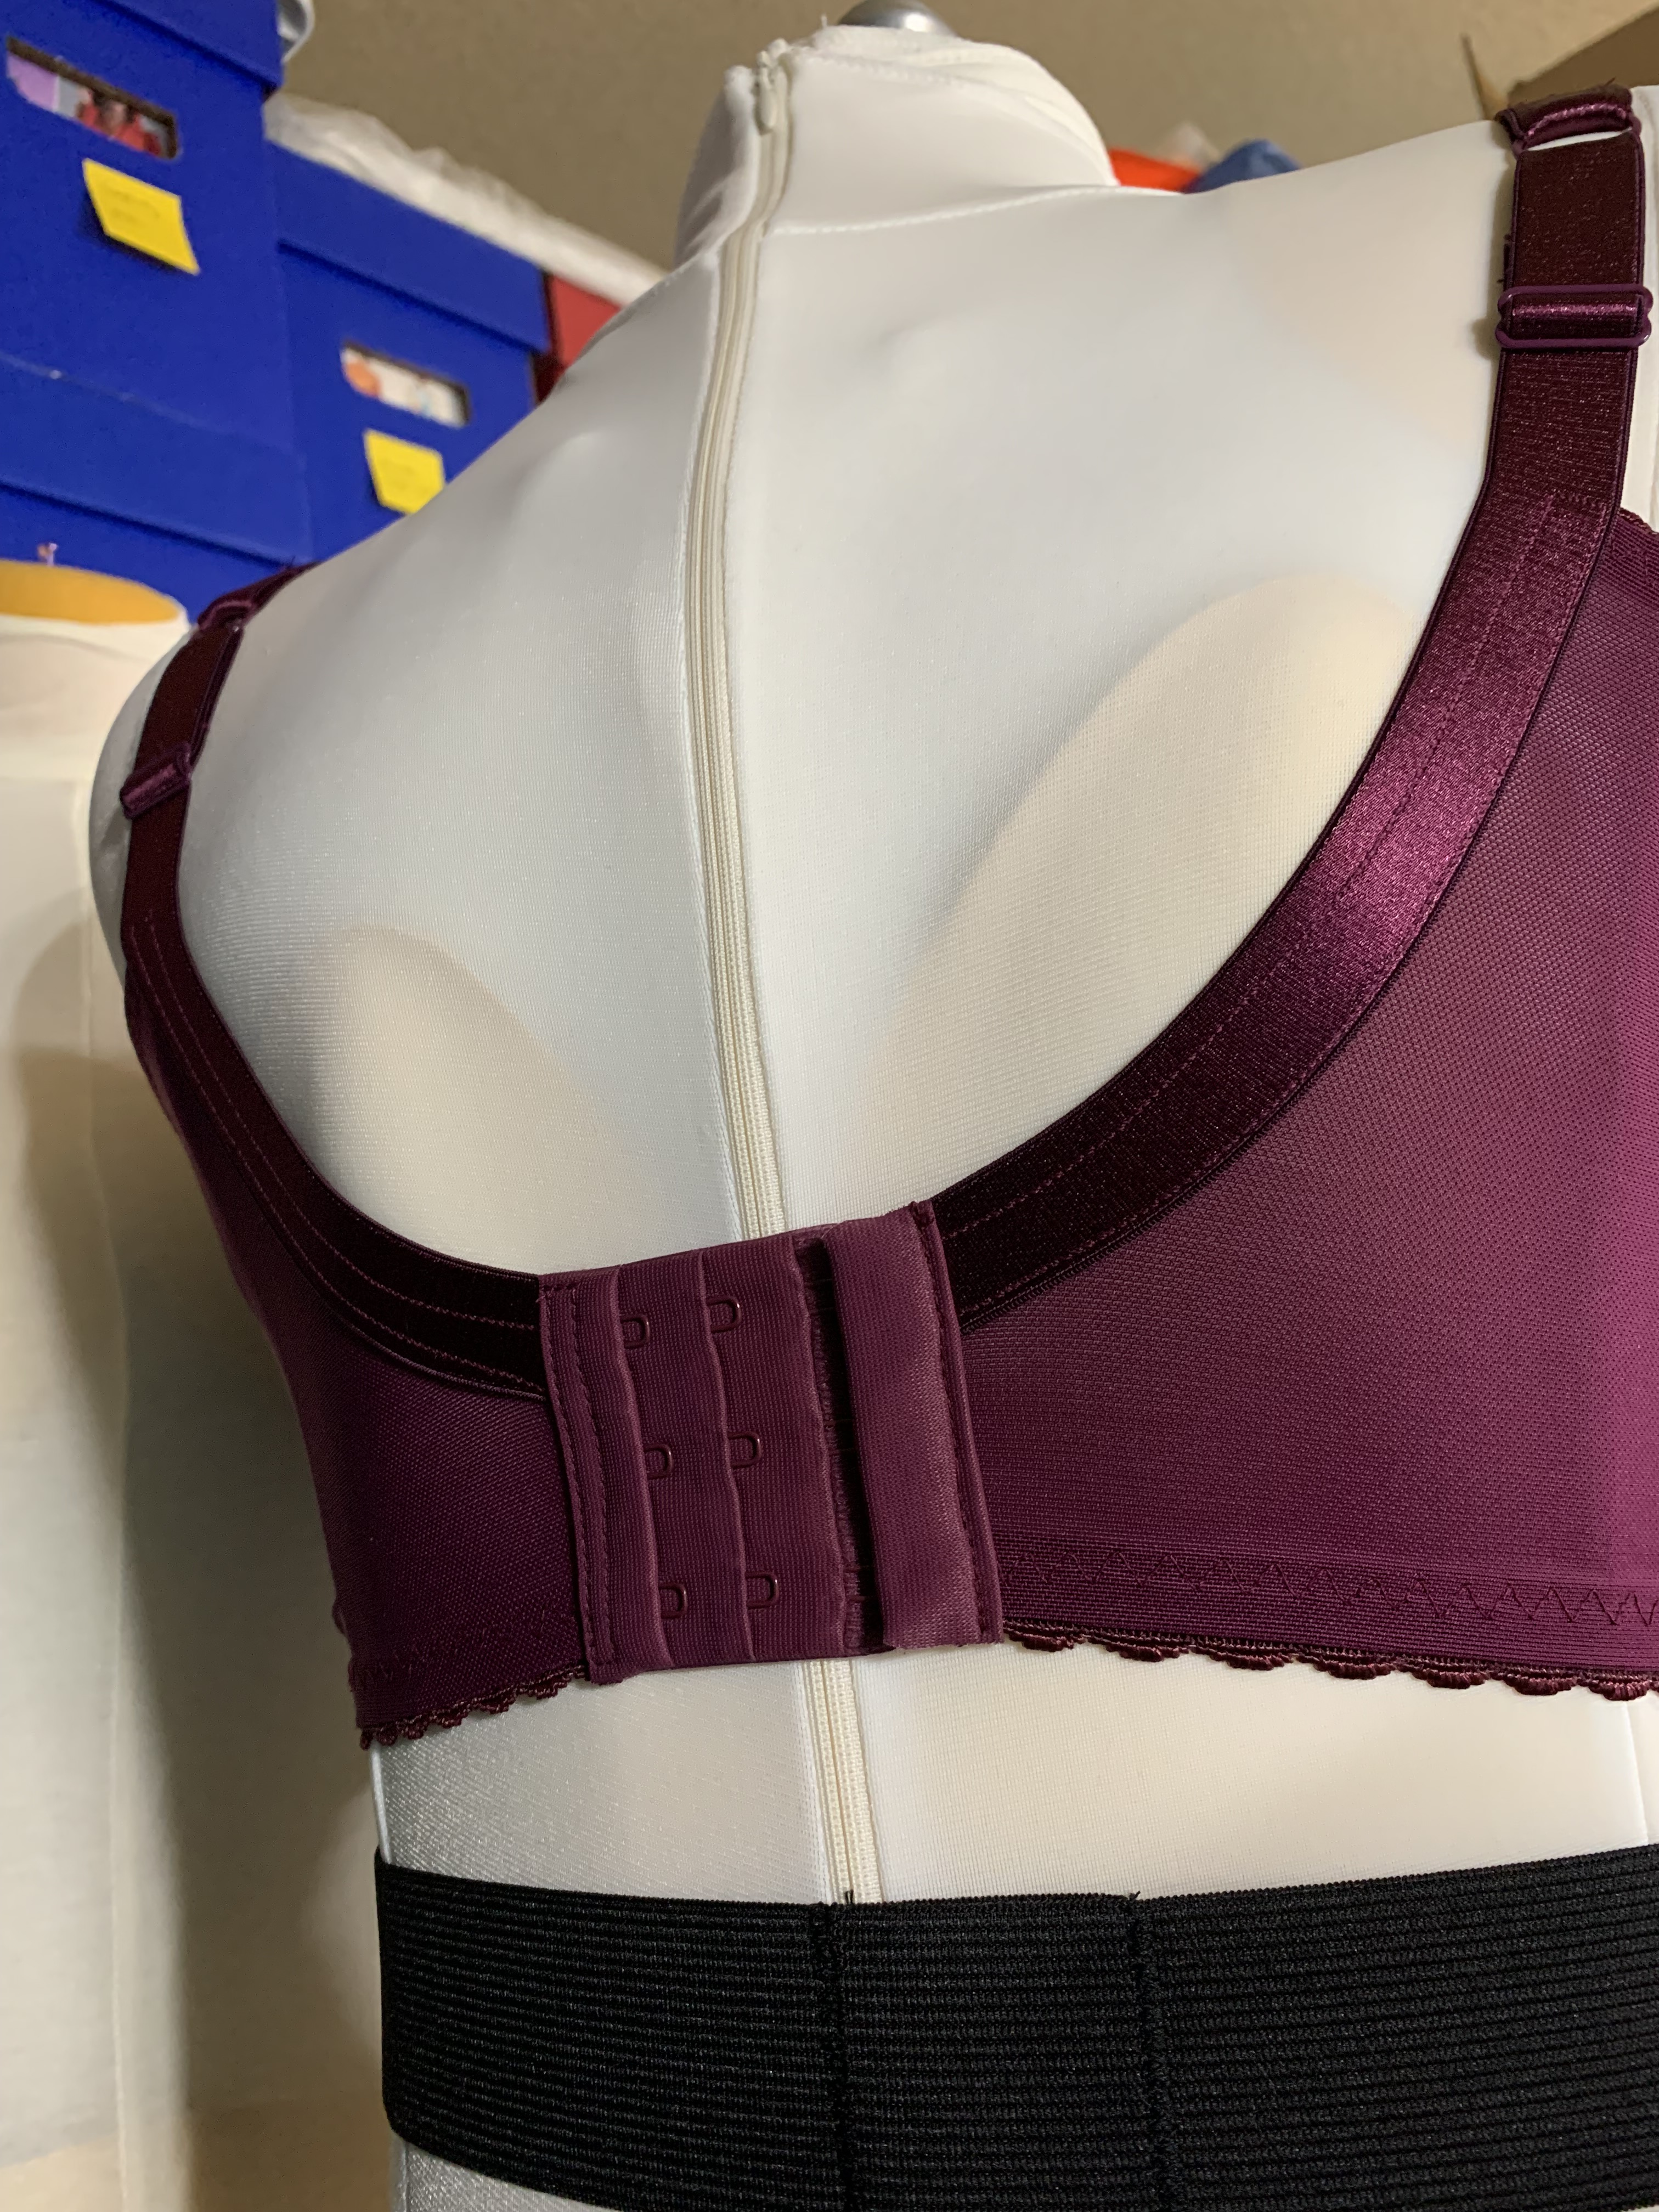 Development of comfortable and well-fitted bra pattern for